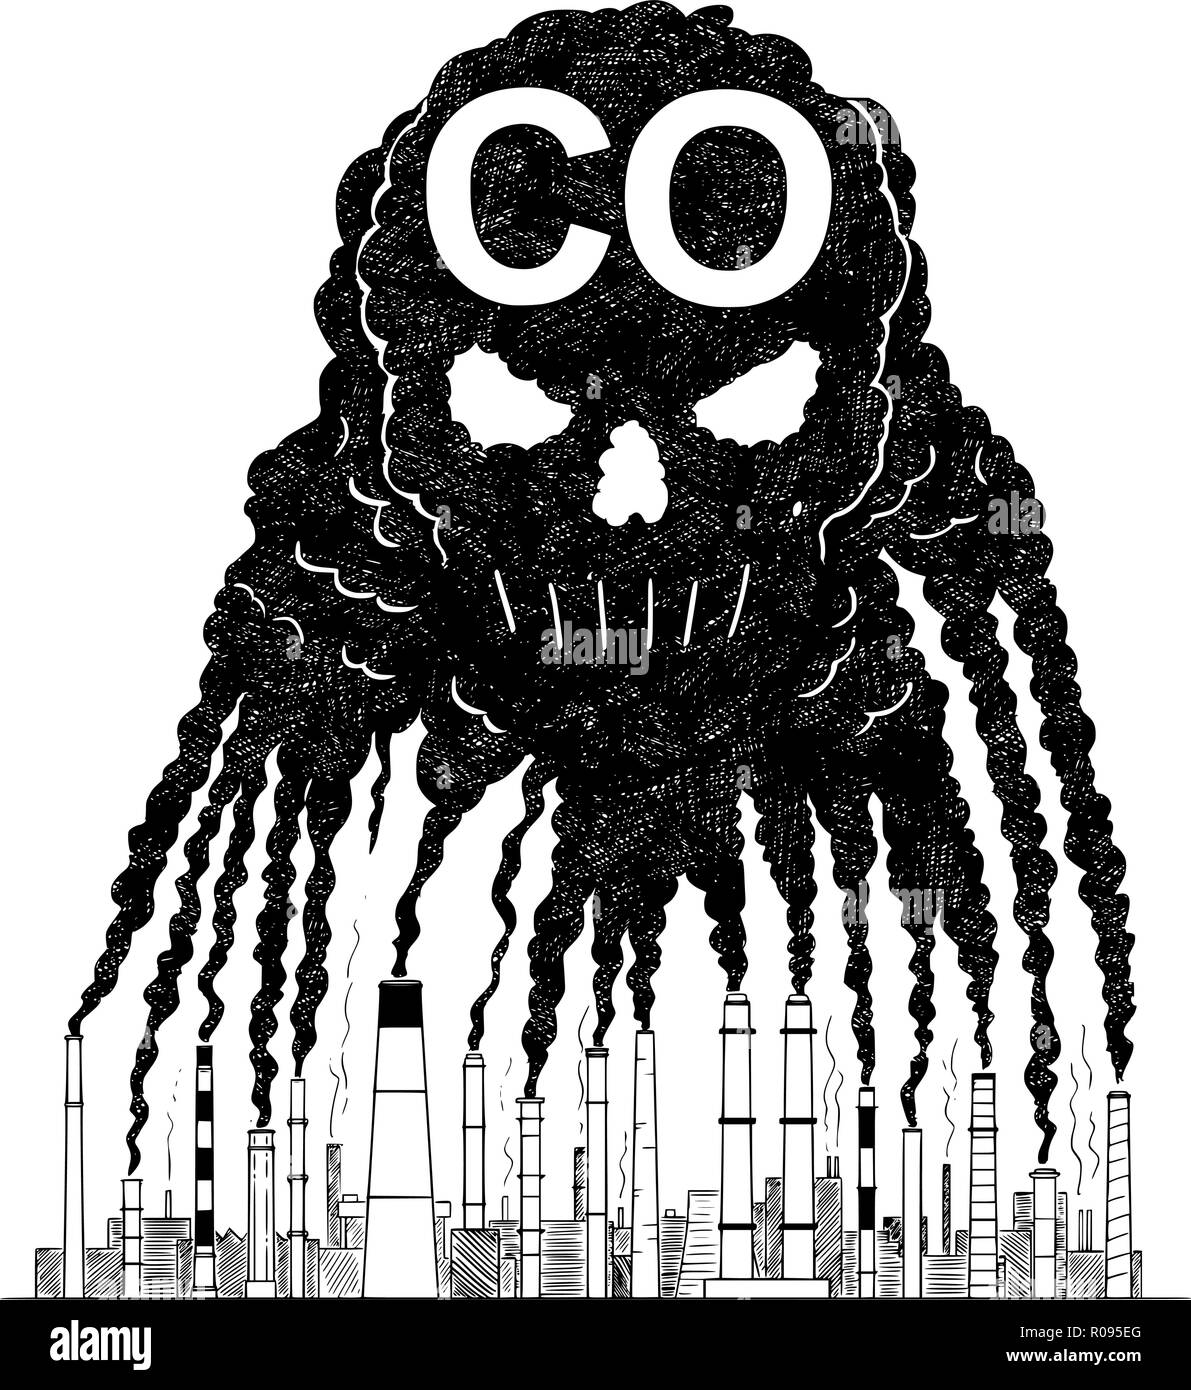 Vector Artistic Drawing Illustration of Smoke From Smokestacks Creating Human Skull, Concept of CO Air Pollution Stock Vector